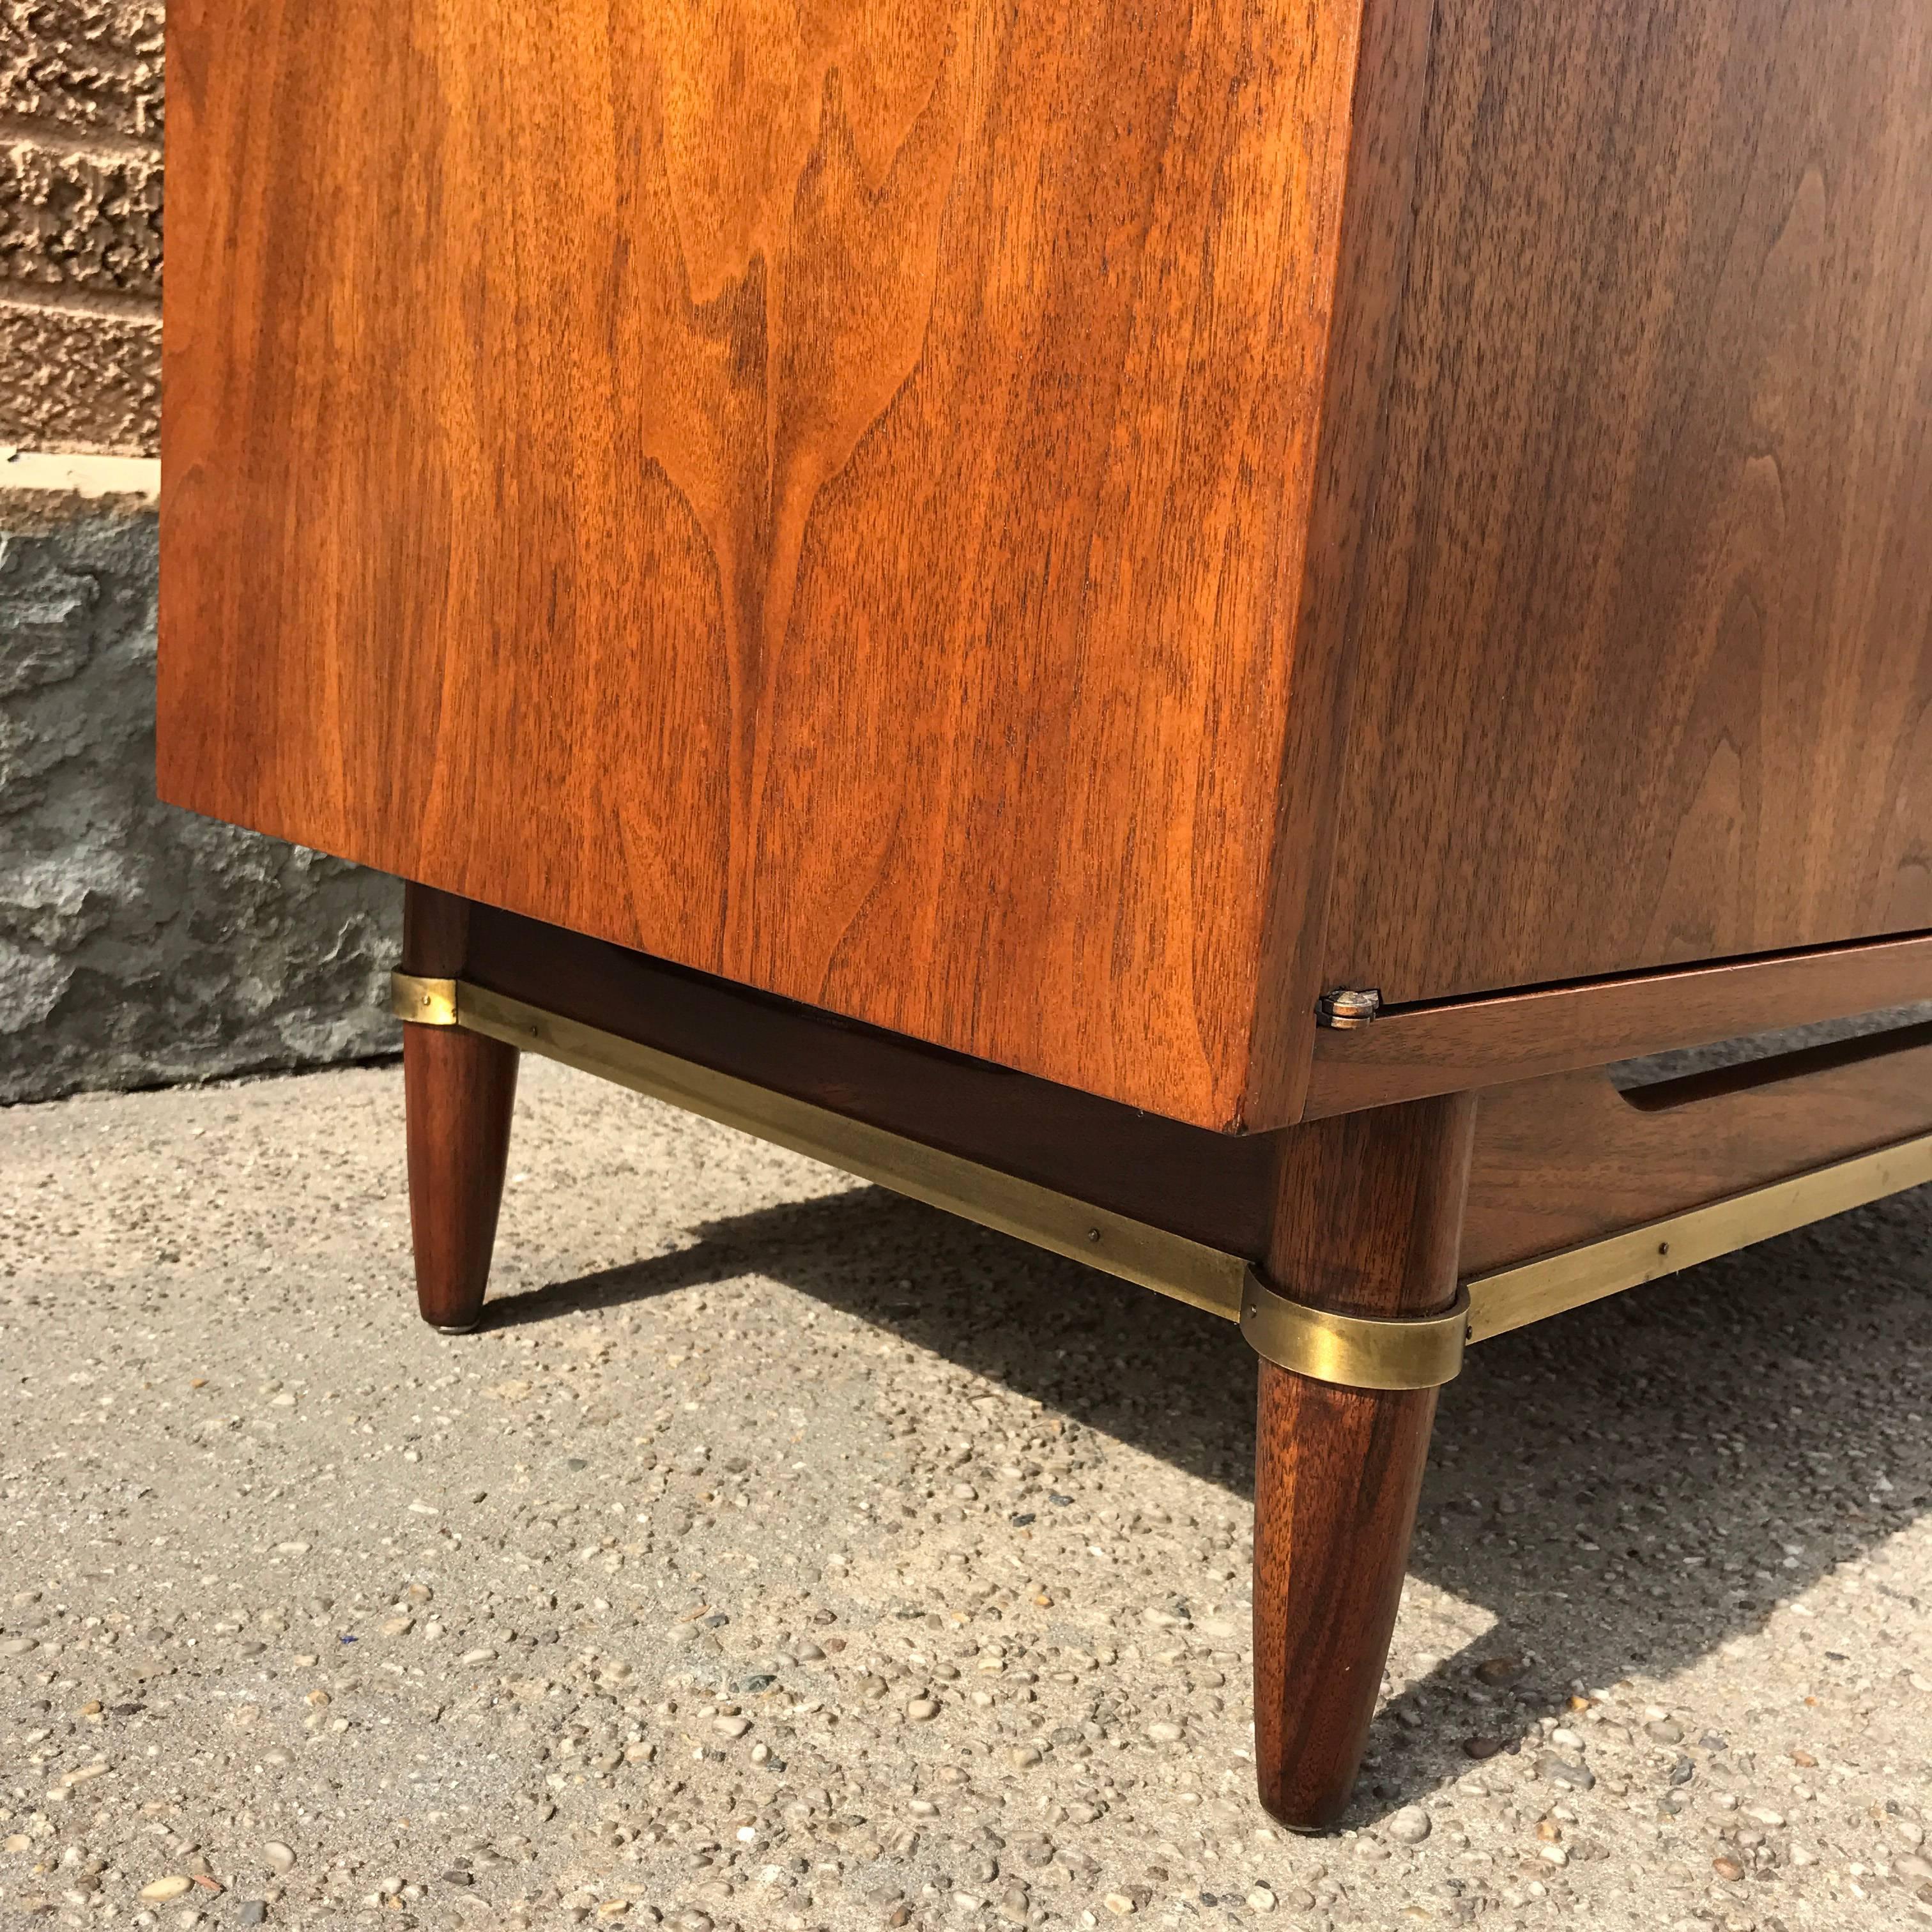 Mid-20th Century Mid-Century Walnut Cabinet by Merton Gershon for American of Martinsville